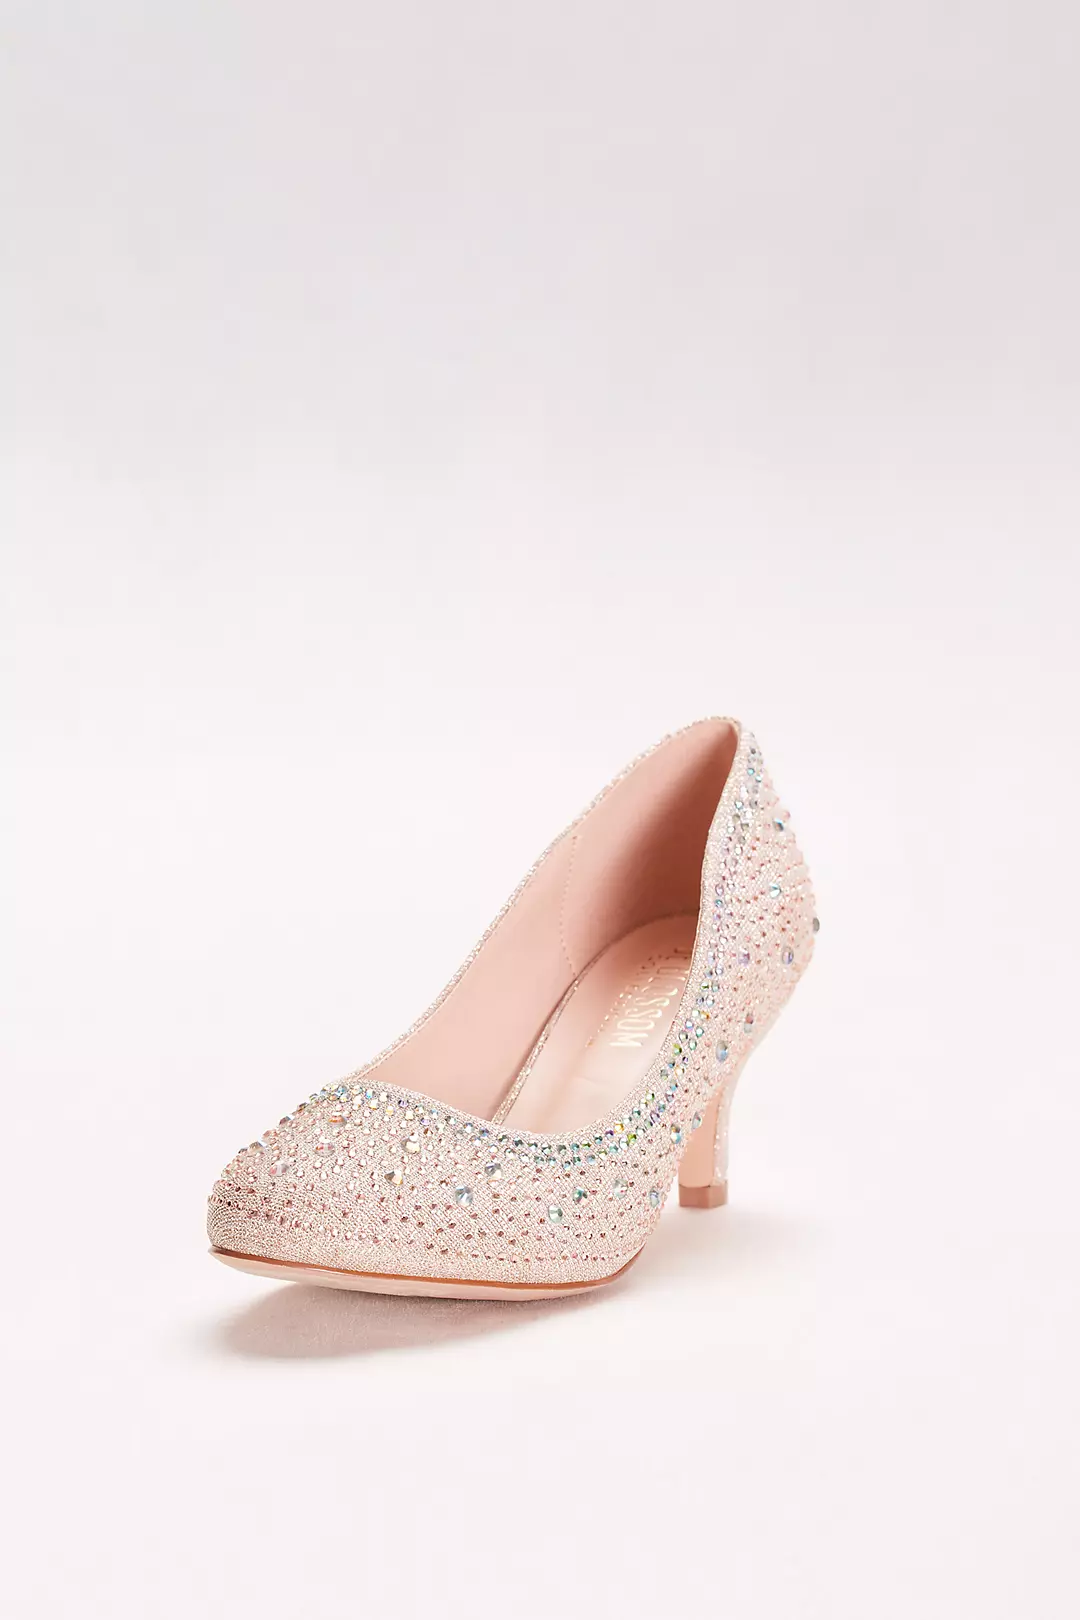 Low-Heeled Pumps with Crystal Embellishment Image